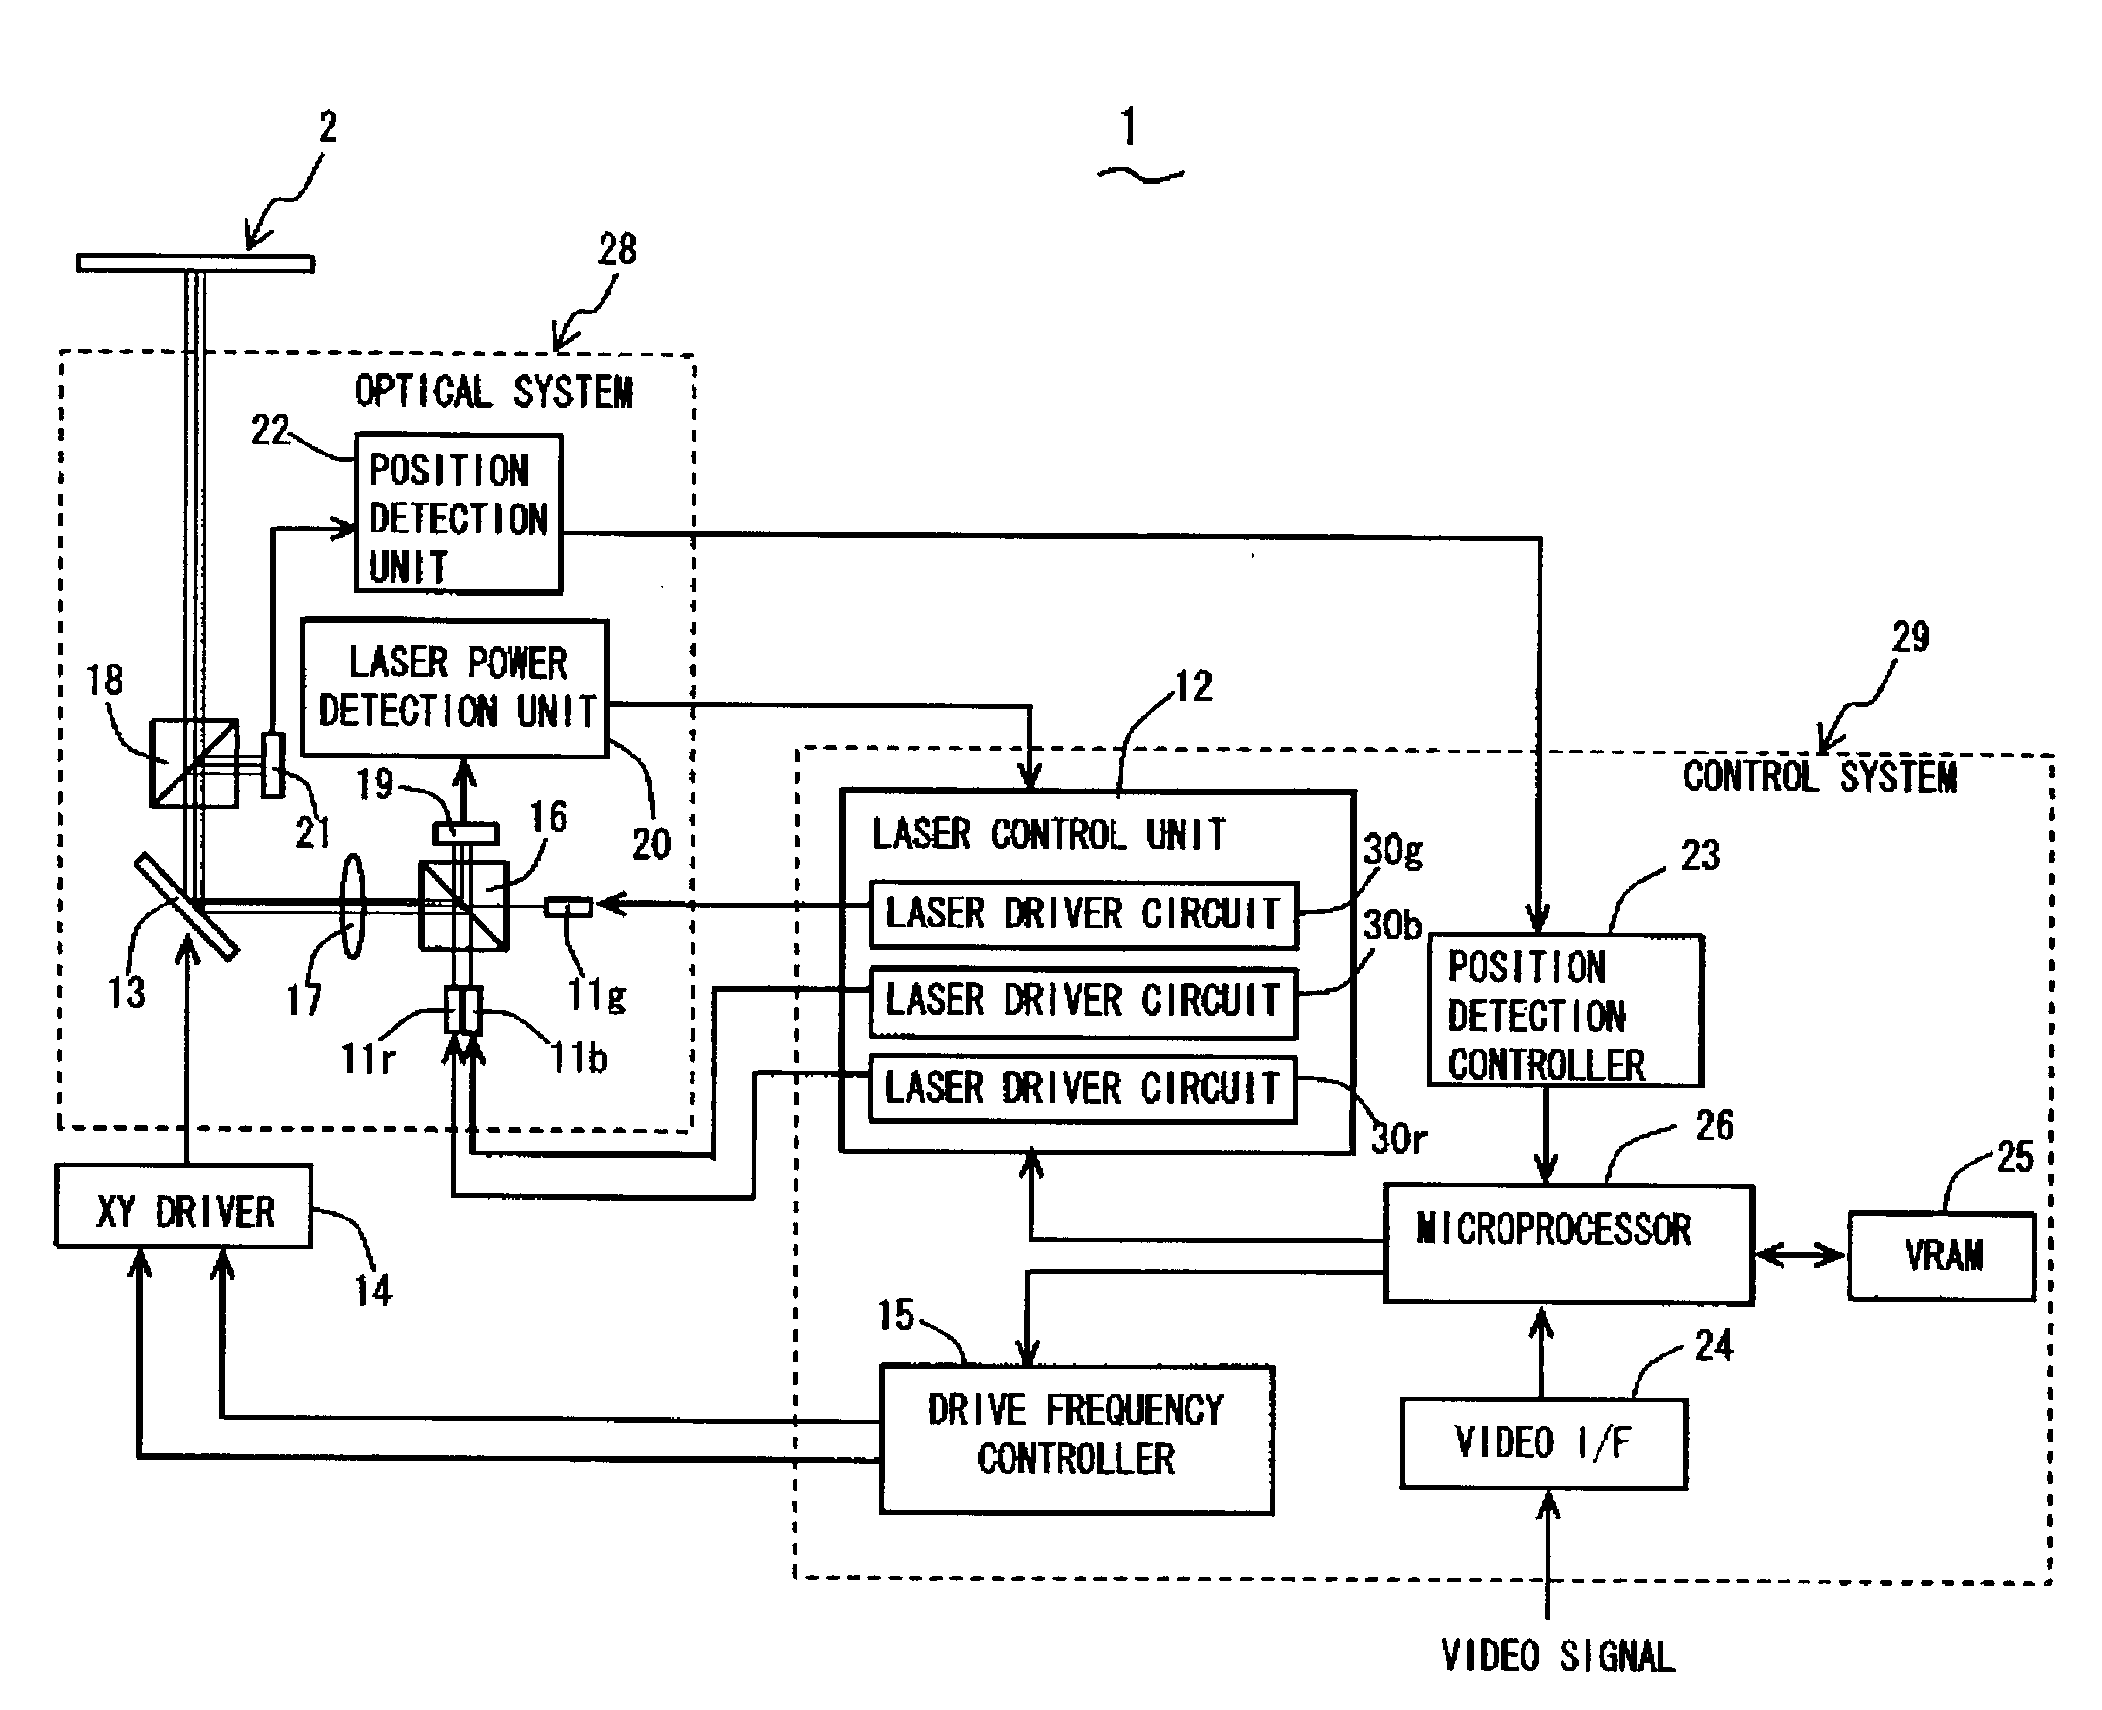 Laser Driver Circuit and Laser Display